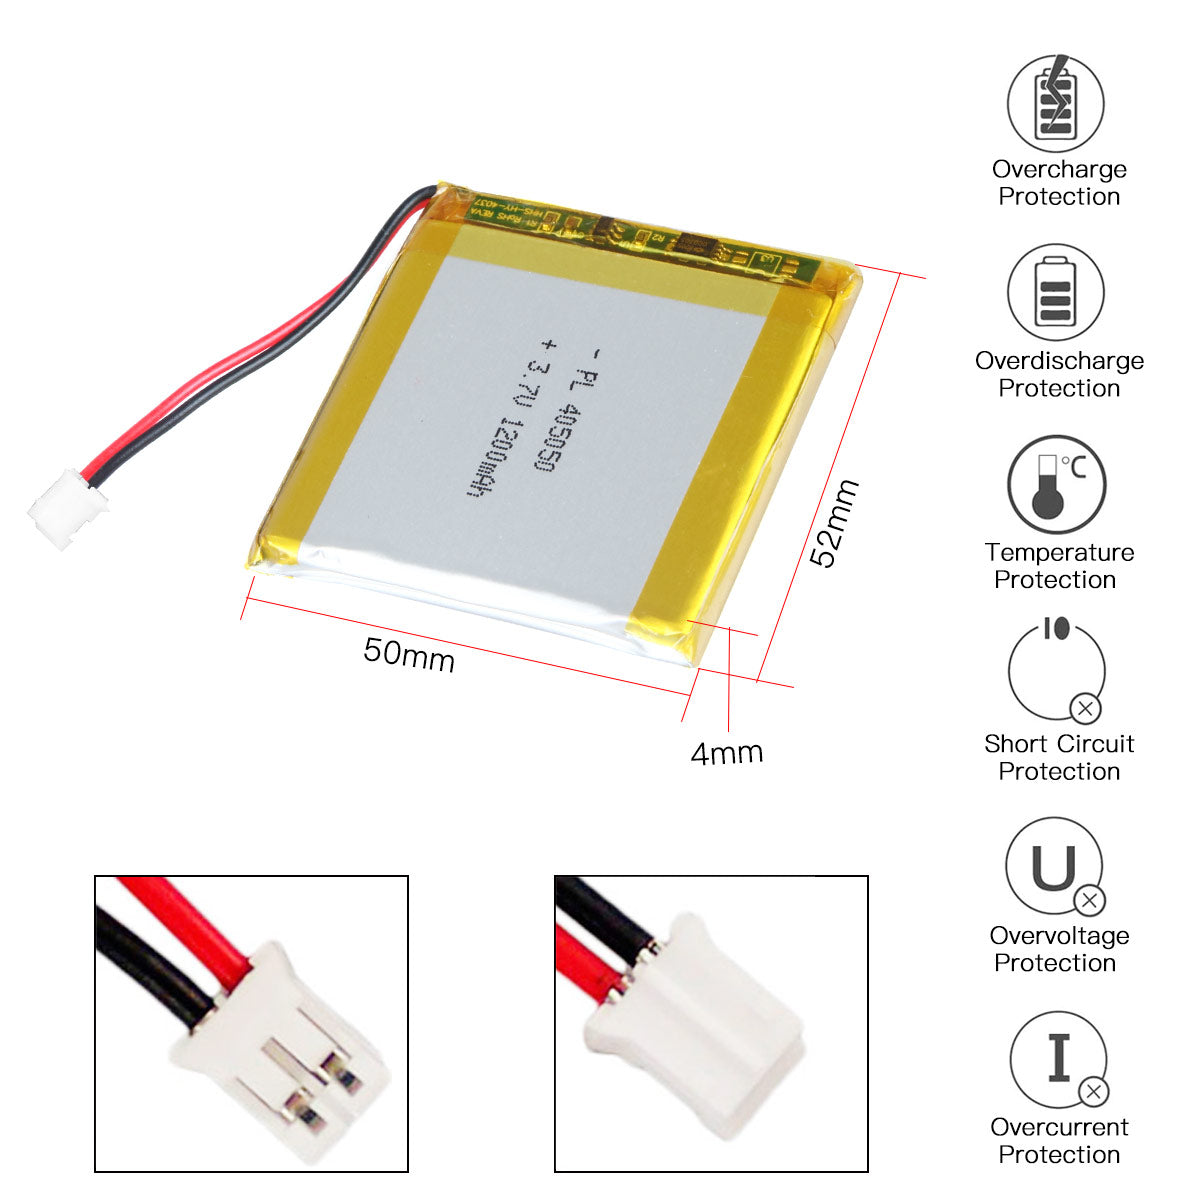 YDL 3.7V 1200mAh 405050 Rechargeable Lipo Battery with JST Connector - YDL Battery